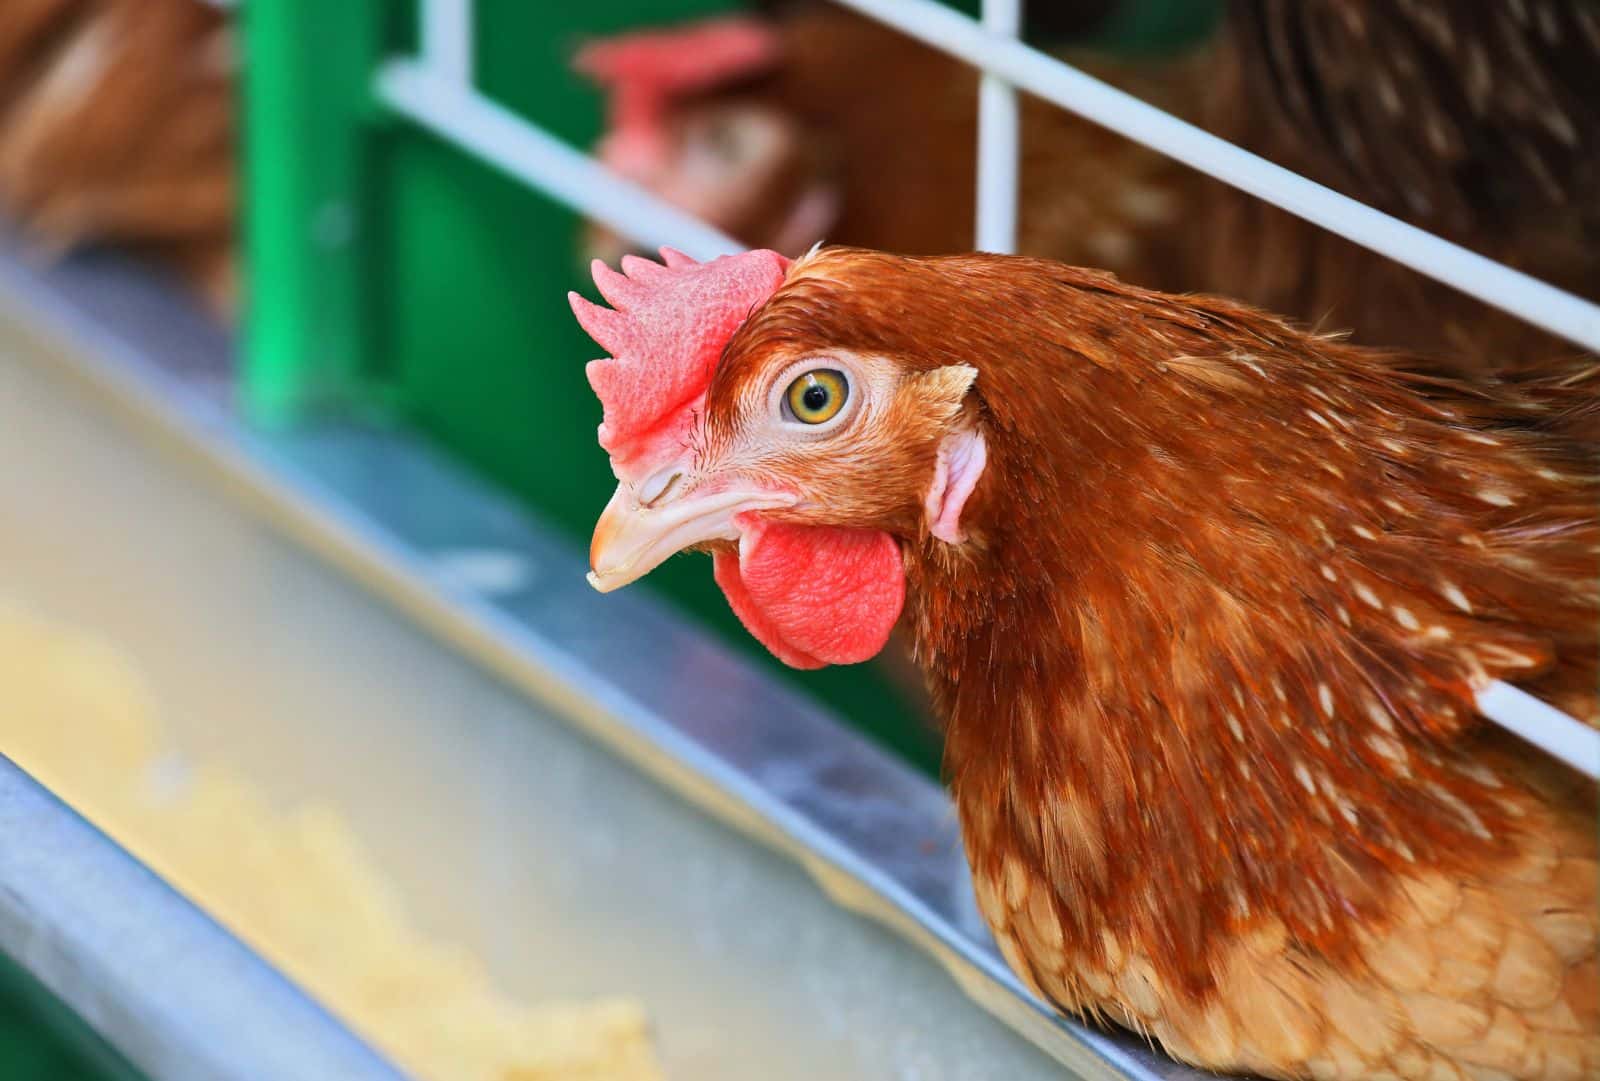 Generous deadline set to end battery cages for layer hens. State governments asked to act sooner.